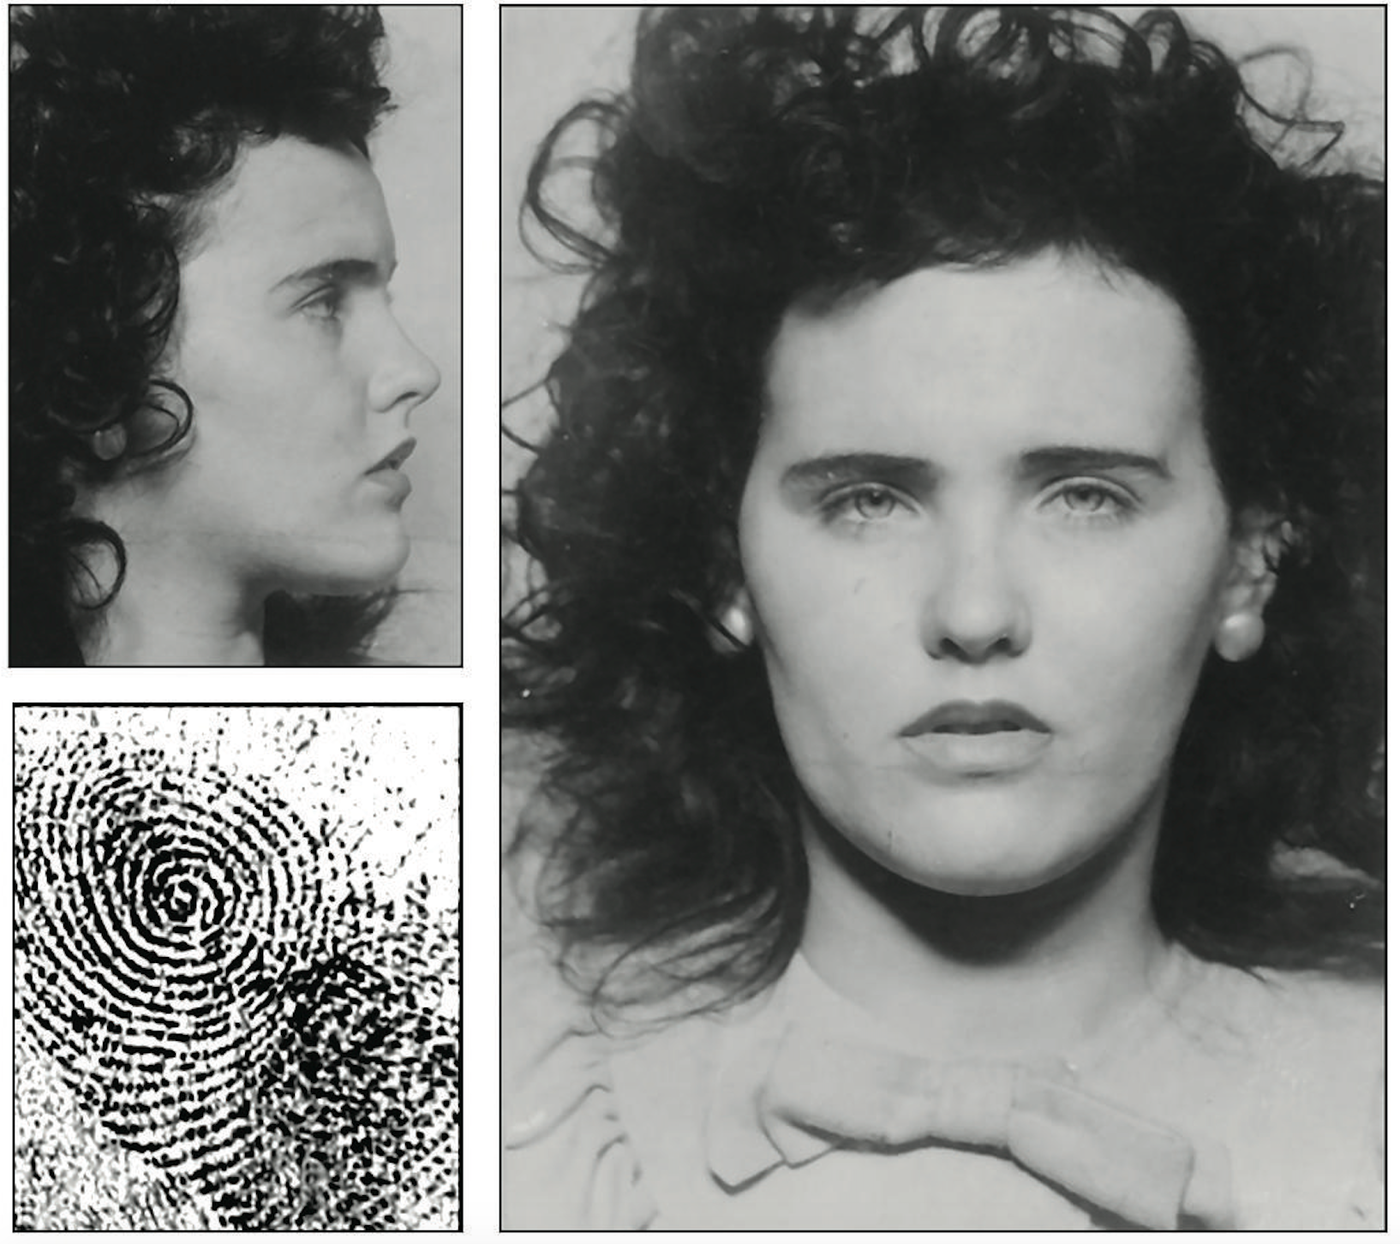 Mug shots and fingerprint of Elizabeth Short, aka the "Black Dahlia," who was brutally murdered in January 1947. The FBI provided Short's prints and mug shots from its files to the press after her murder.